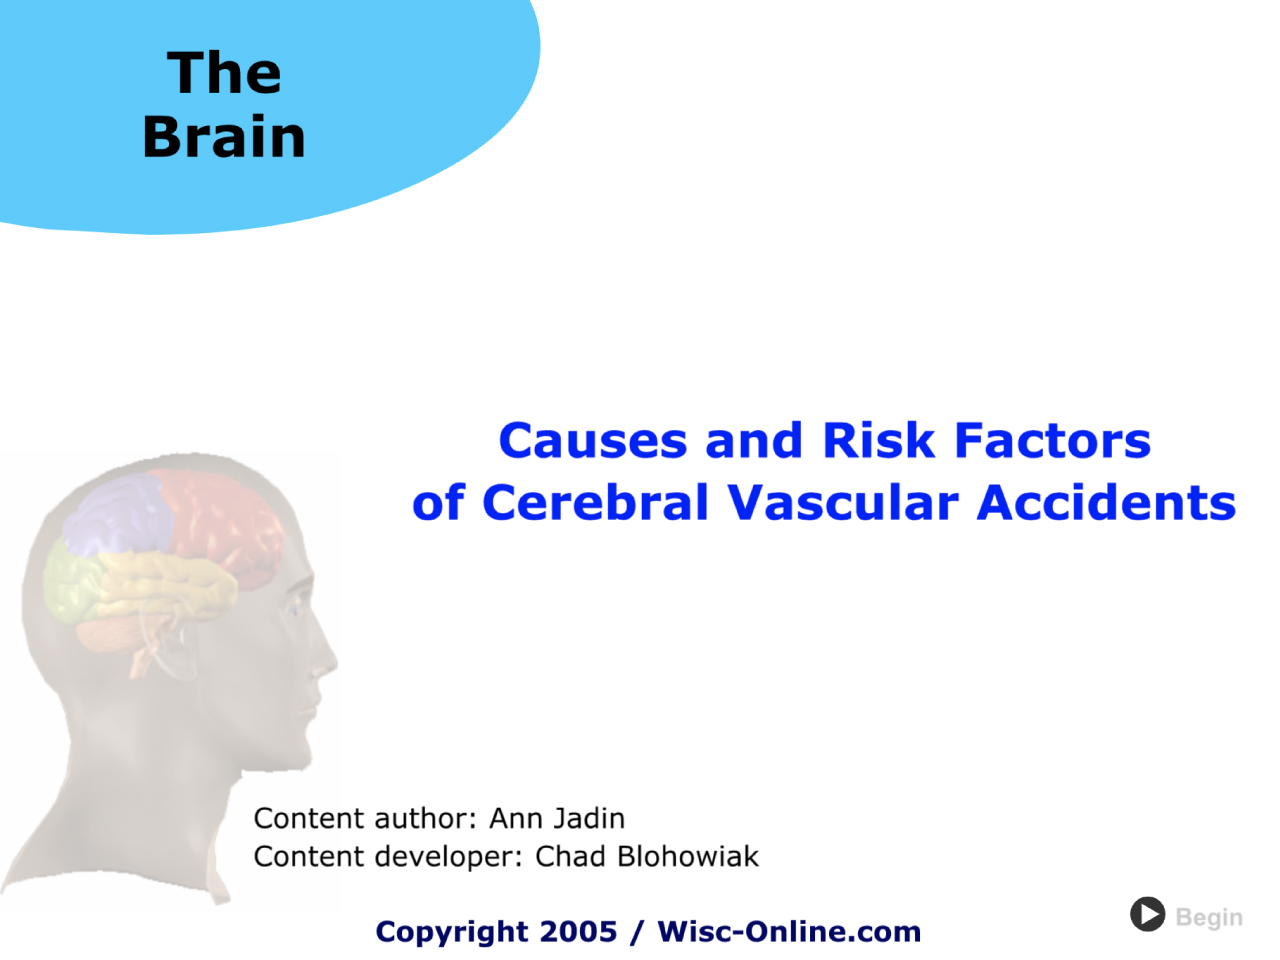 Causes and Risk Factors of Cerebral Vascular Accidents